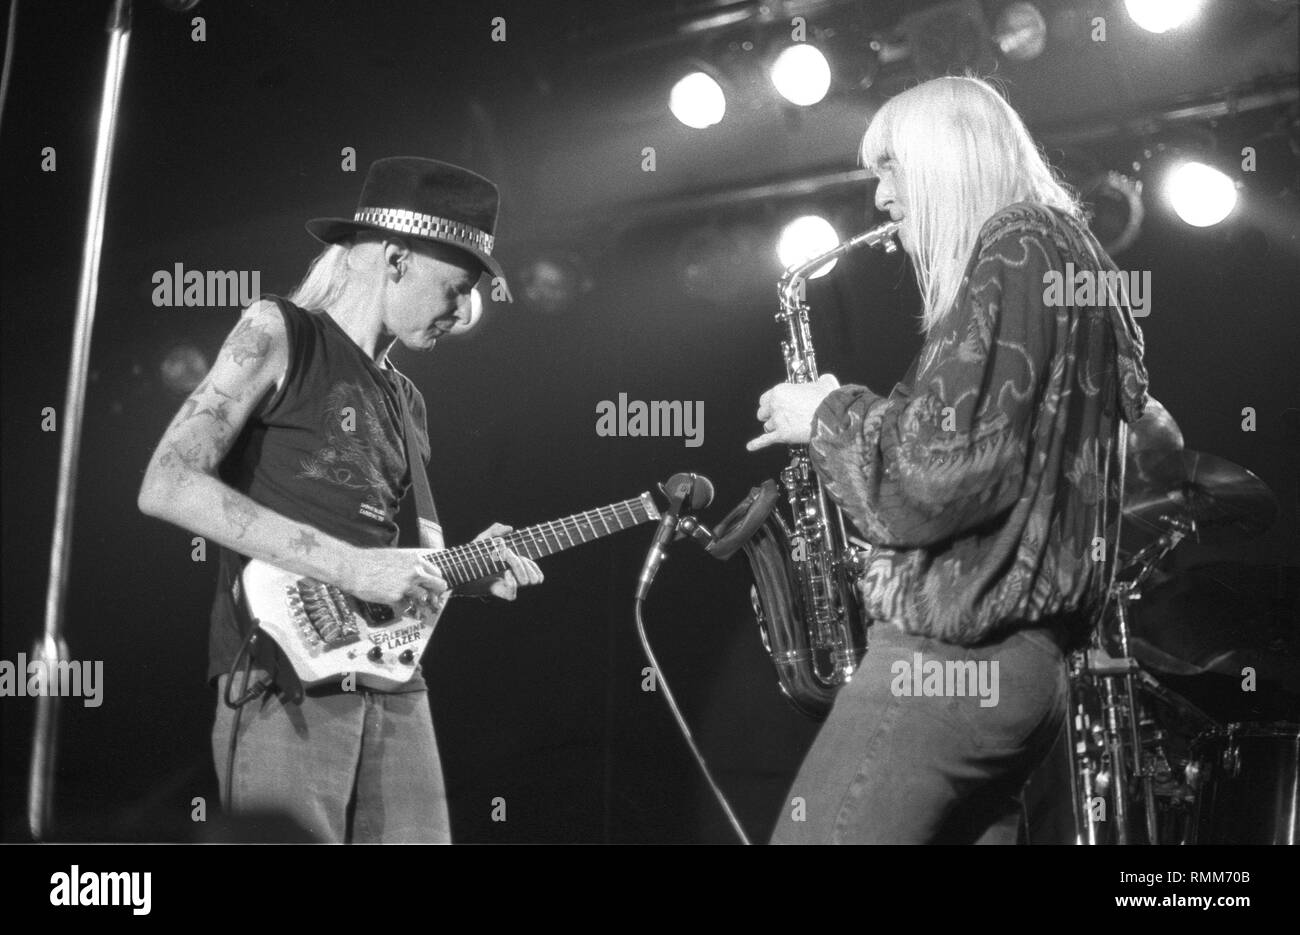 Brothers Johnny and Edgar WInter are shown performing on stage together during a 'live' concert appearance. Stock Photo